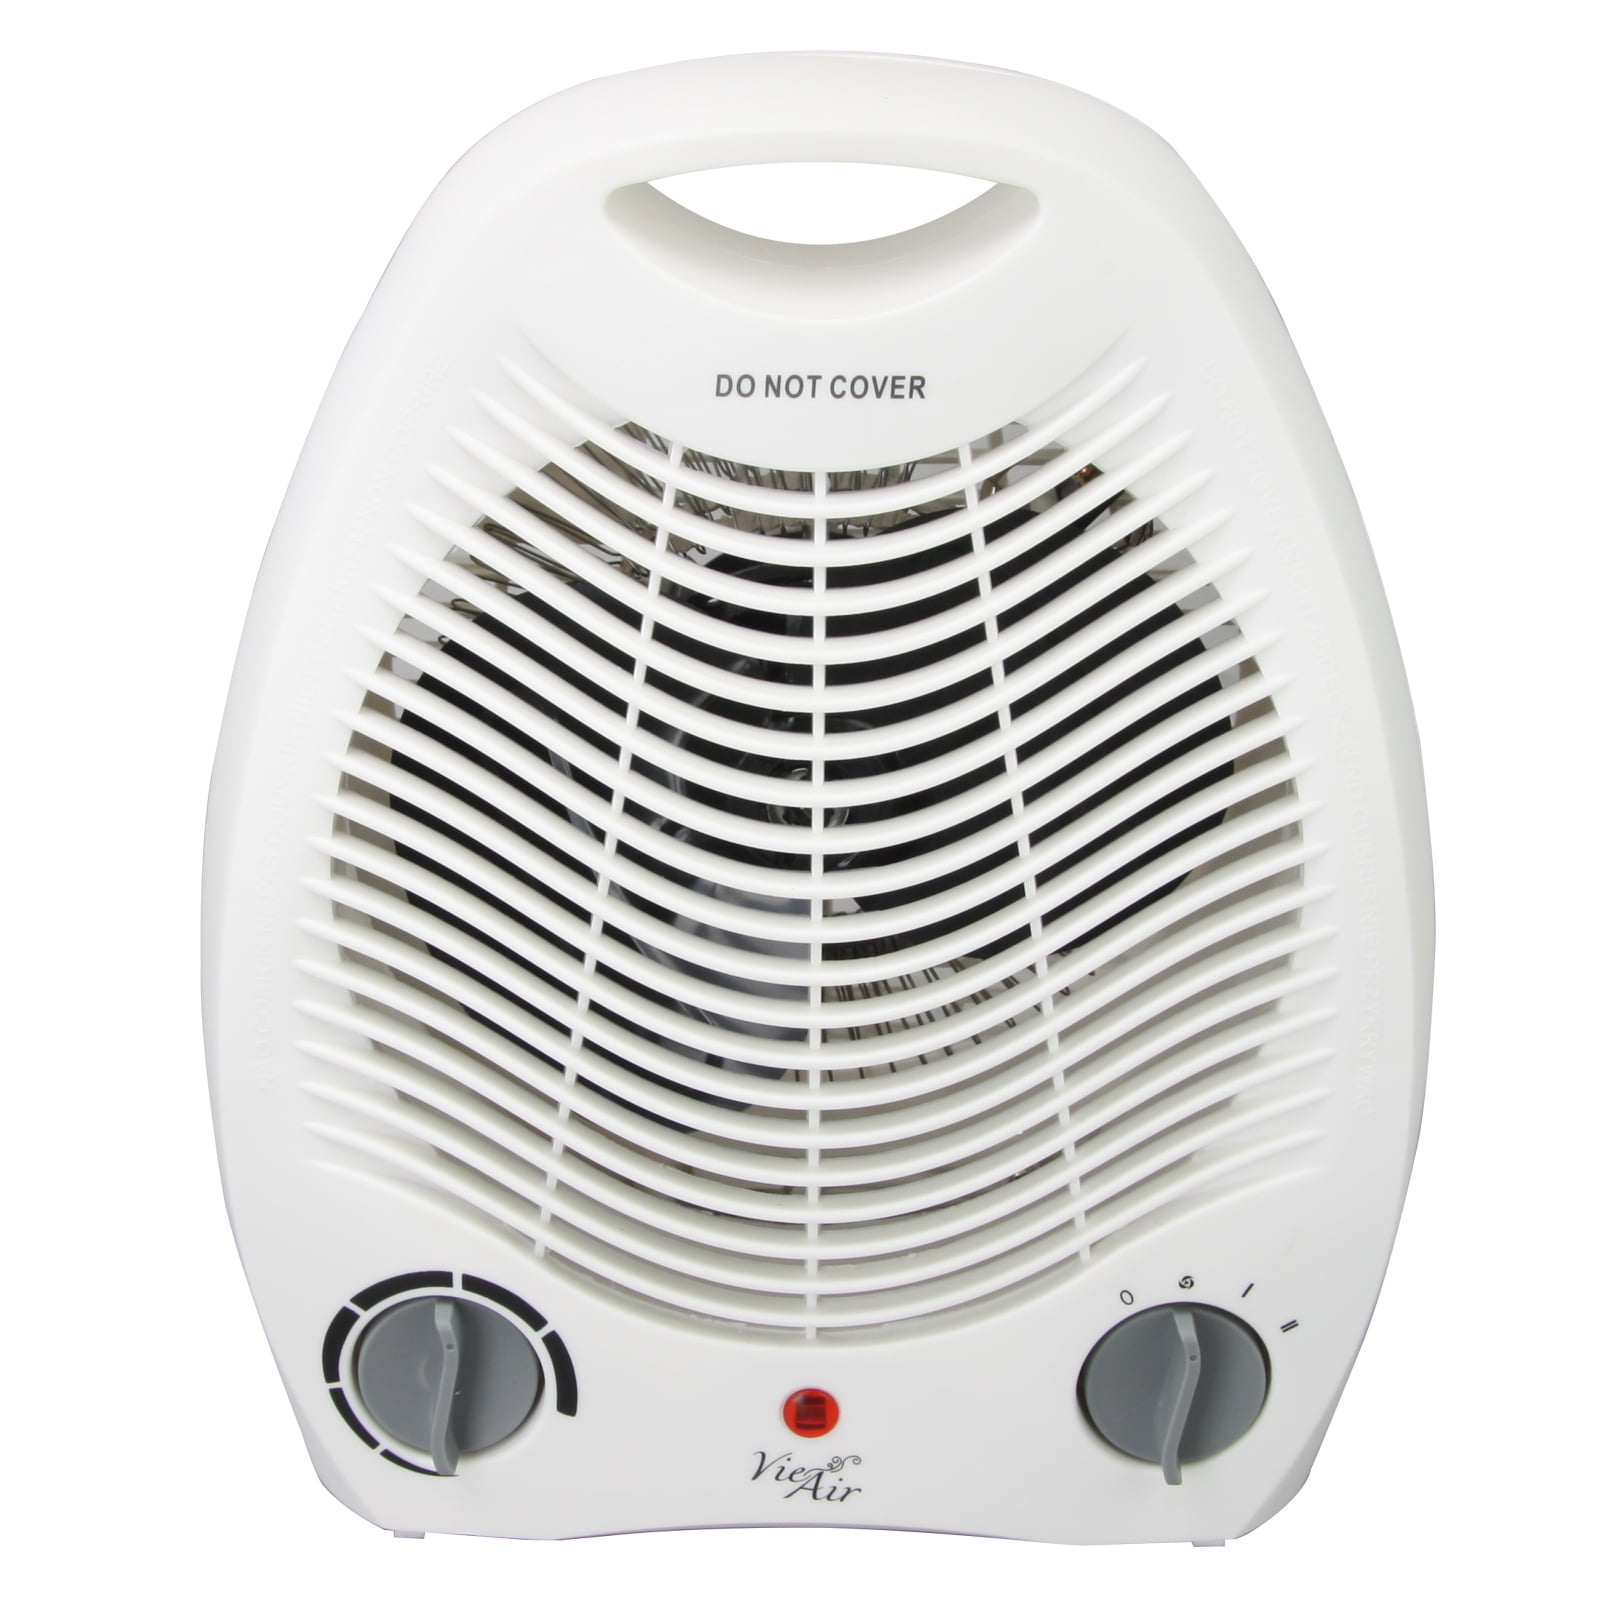 Fan Forced Heater 1500W Electric Portable 3-Heat Settings Adjustable Thermostat 